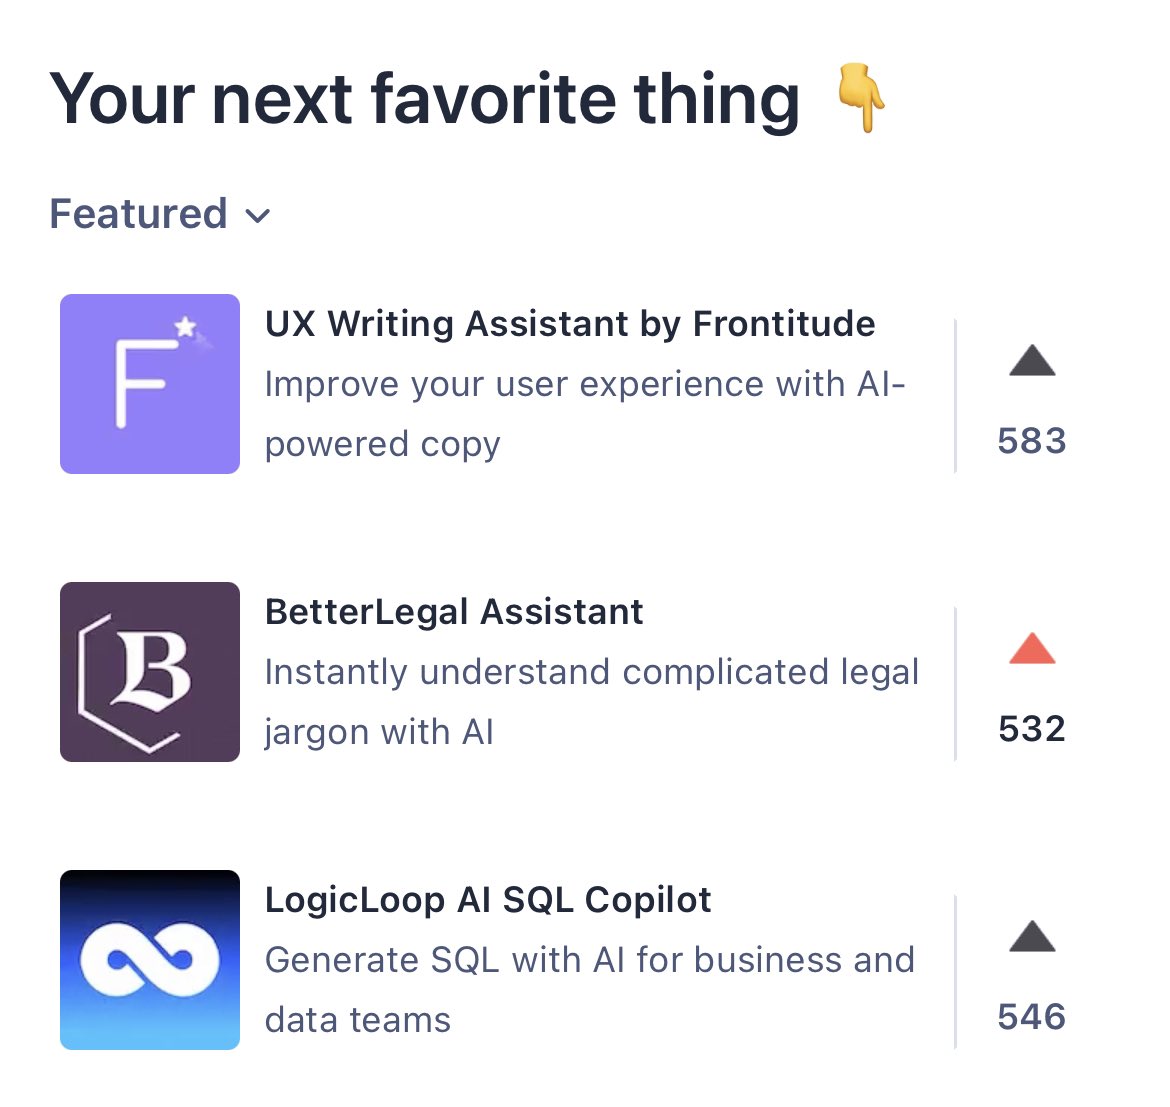 BetterLegal Assistant's recent launch on ProductHunt was a big success, ending the day at No. 2 sitewide